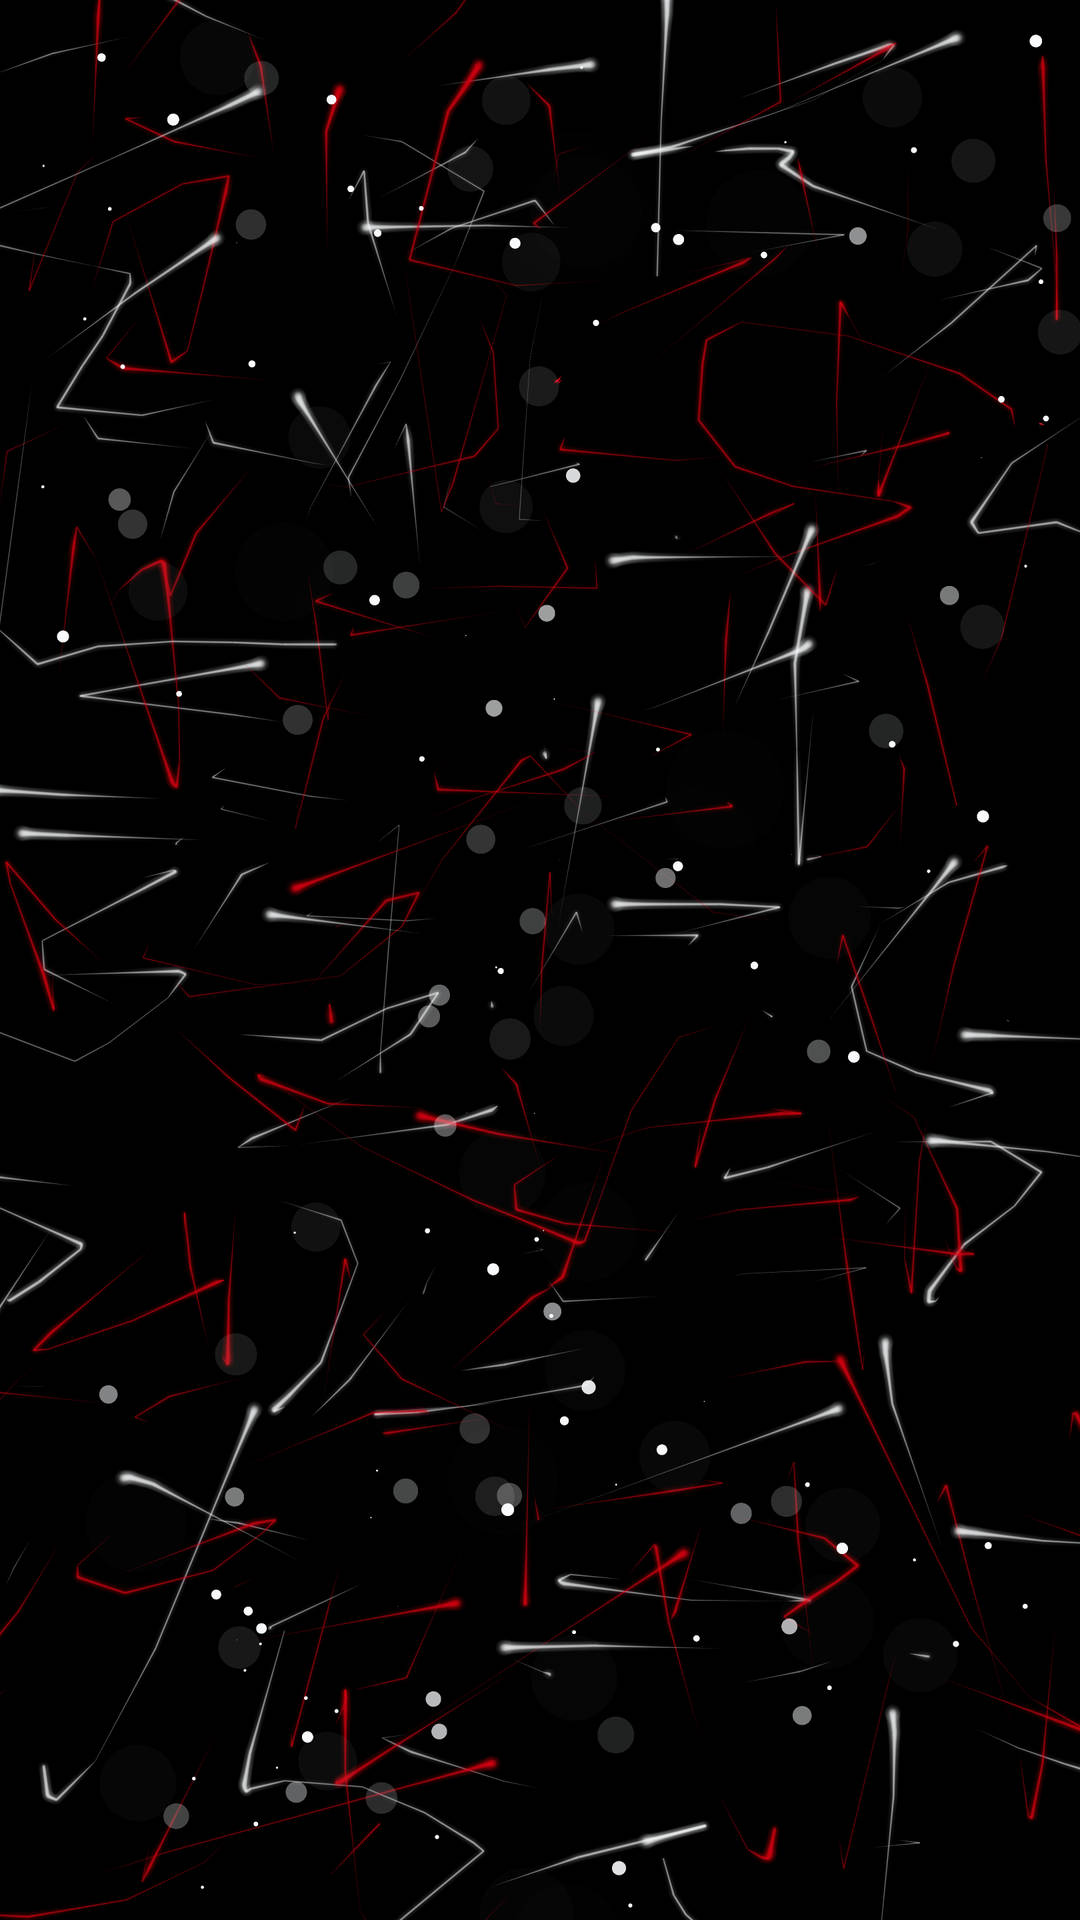 Red And White Specks In Black Backdrop Wallpaper